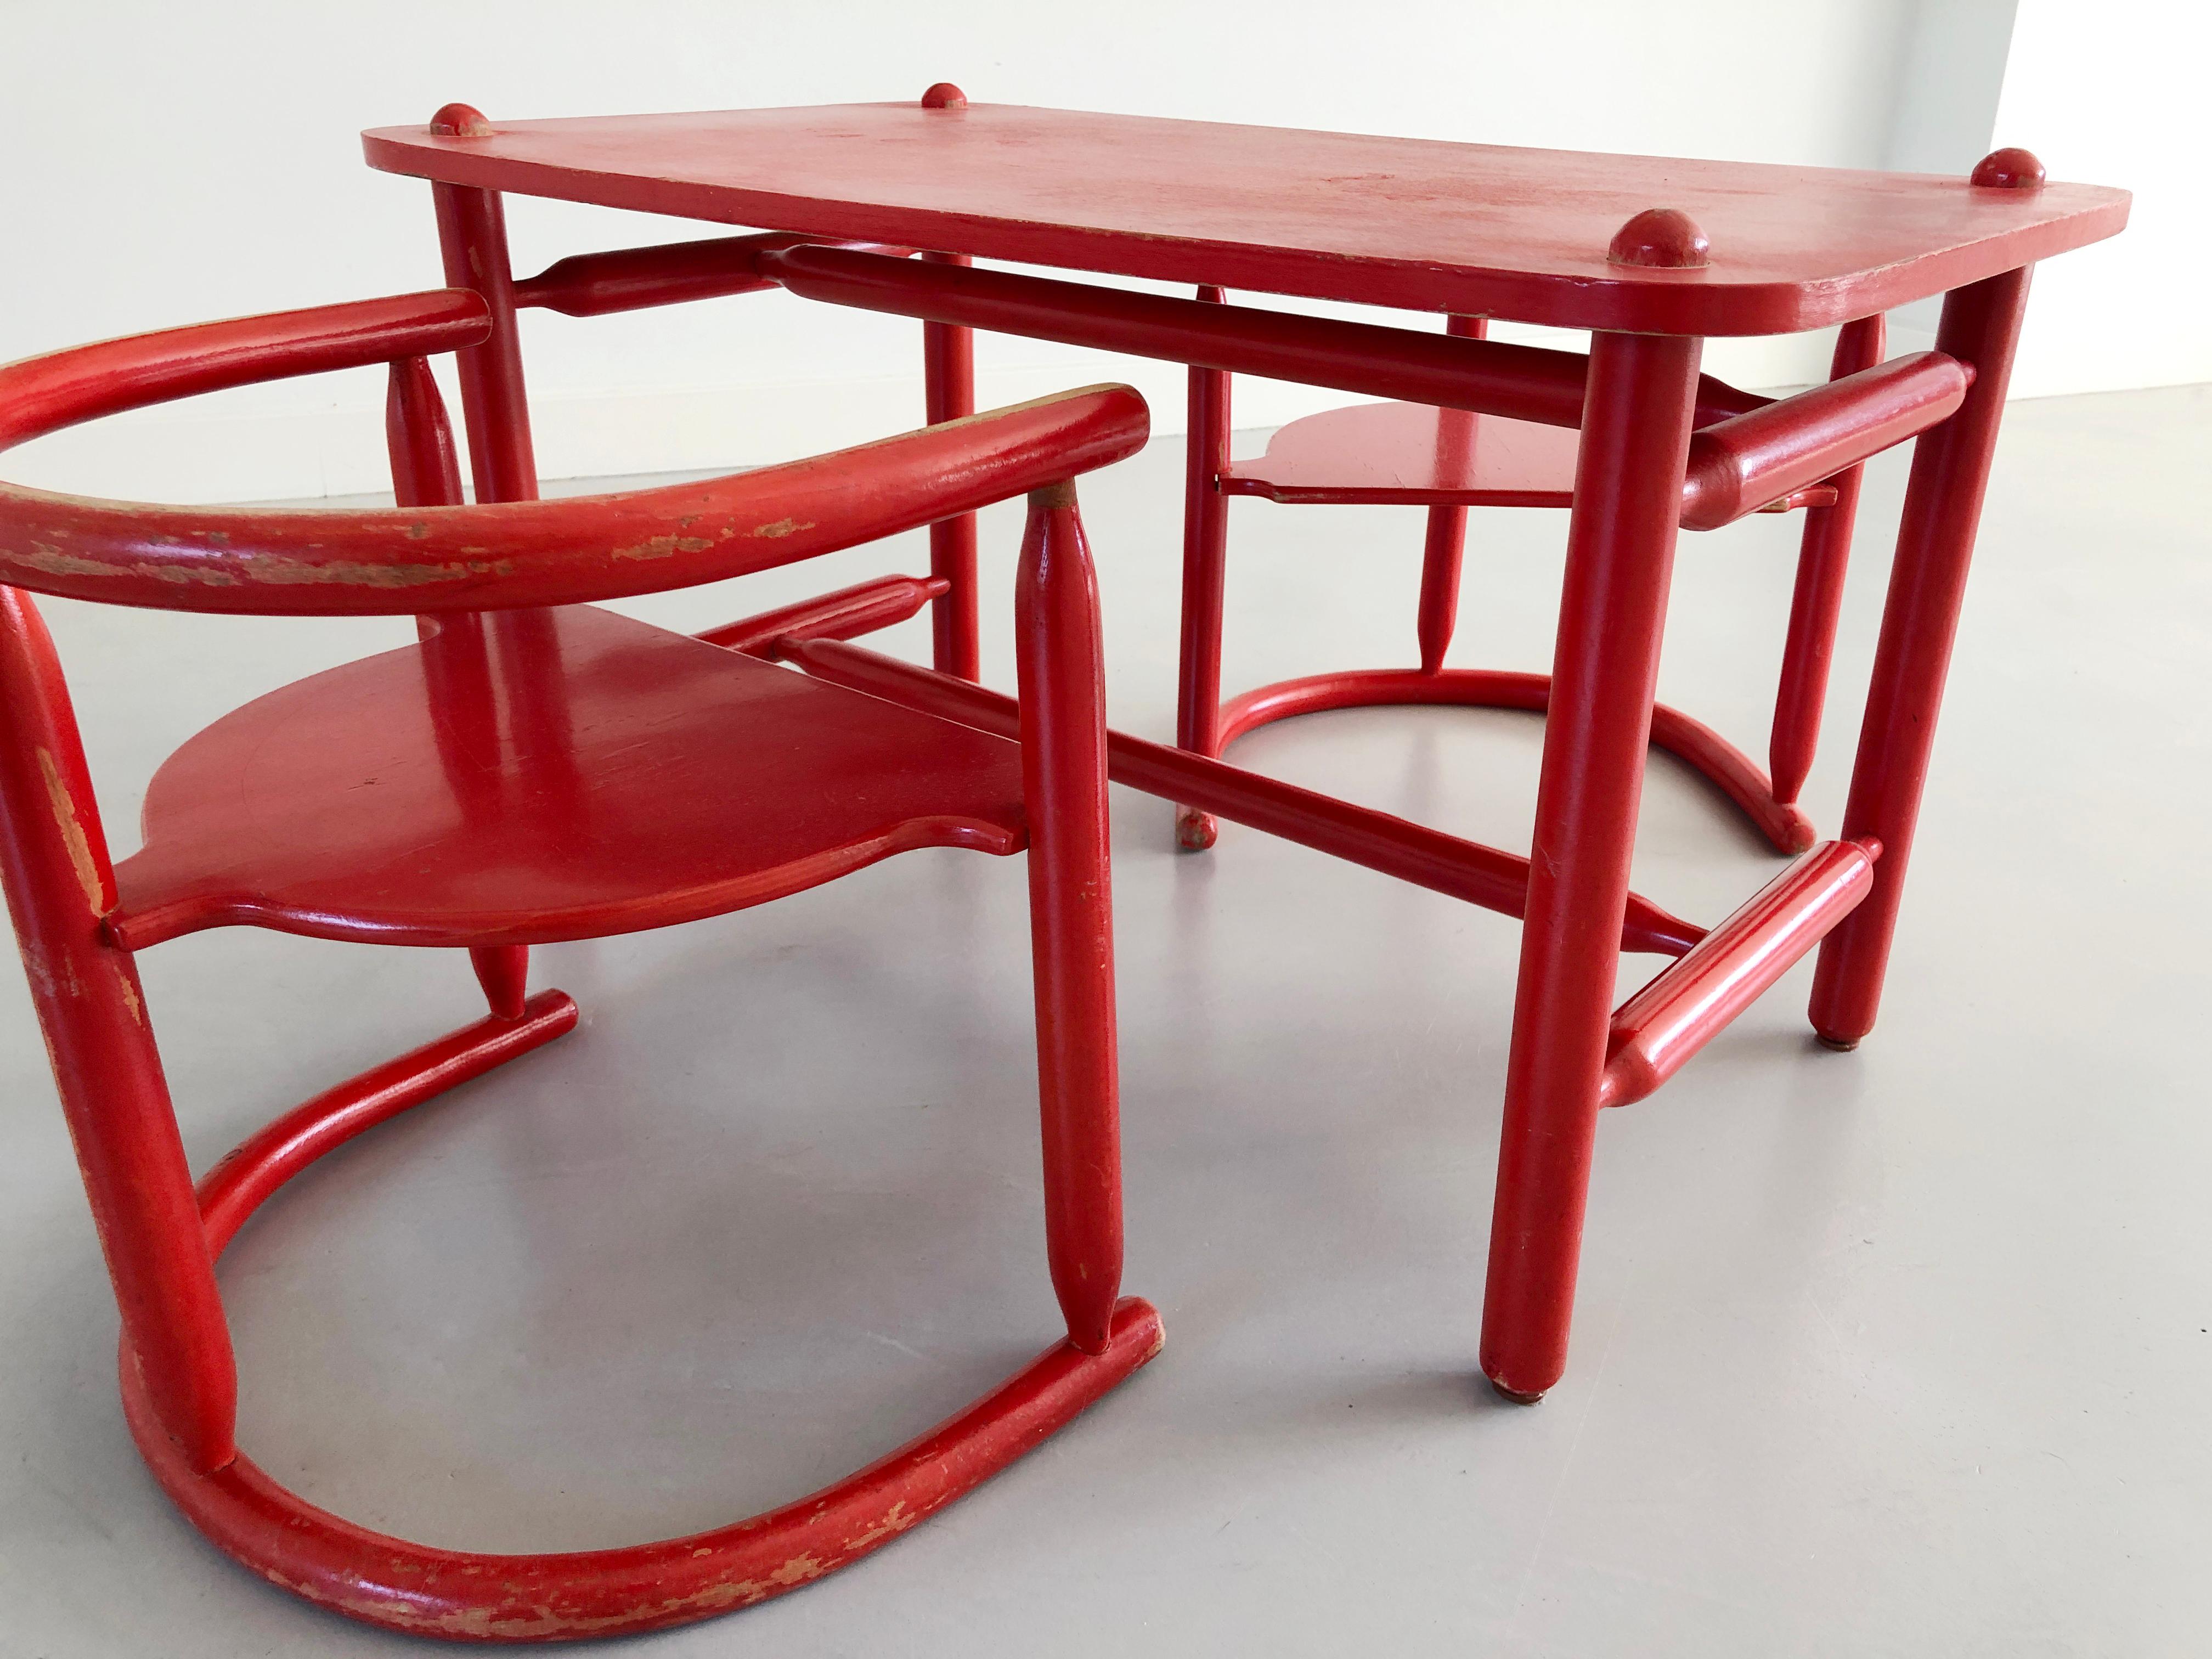 2 Chairs & Table set Anna - Karin Mobring for IKEA 1963 - Original paint For Sale 4